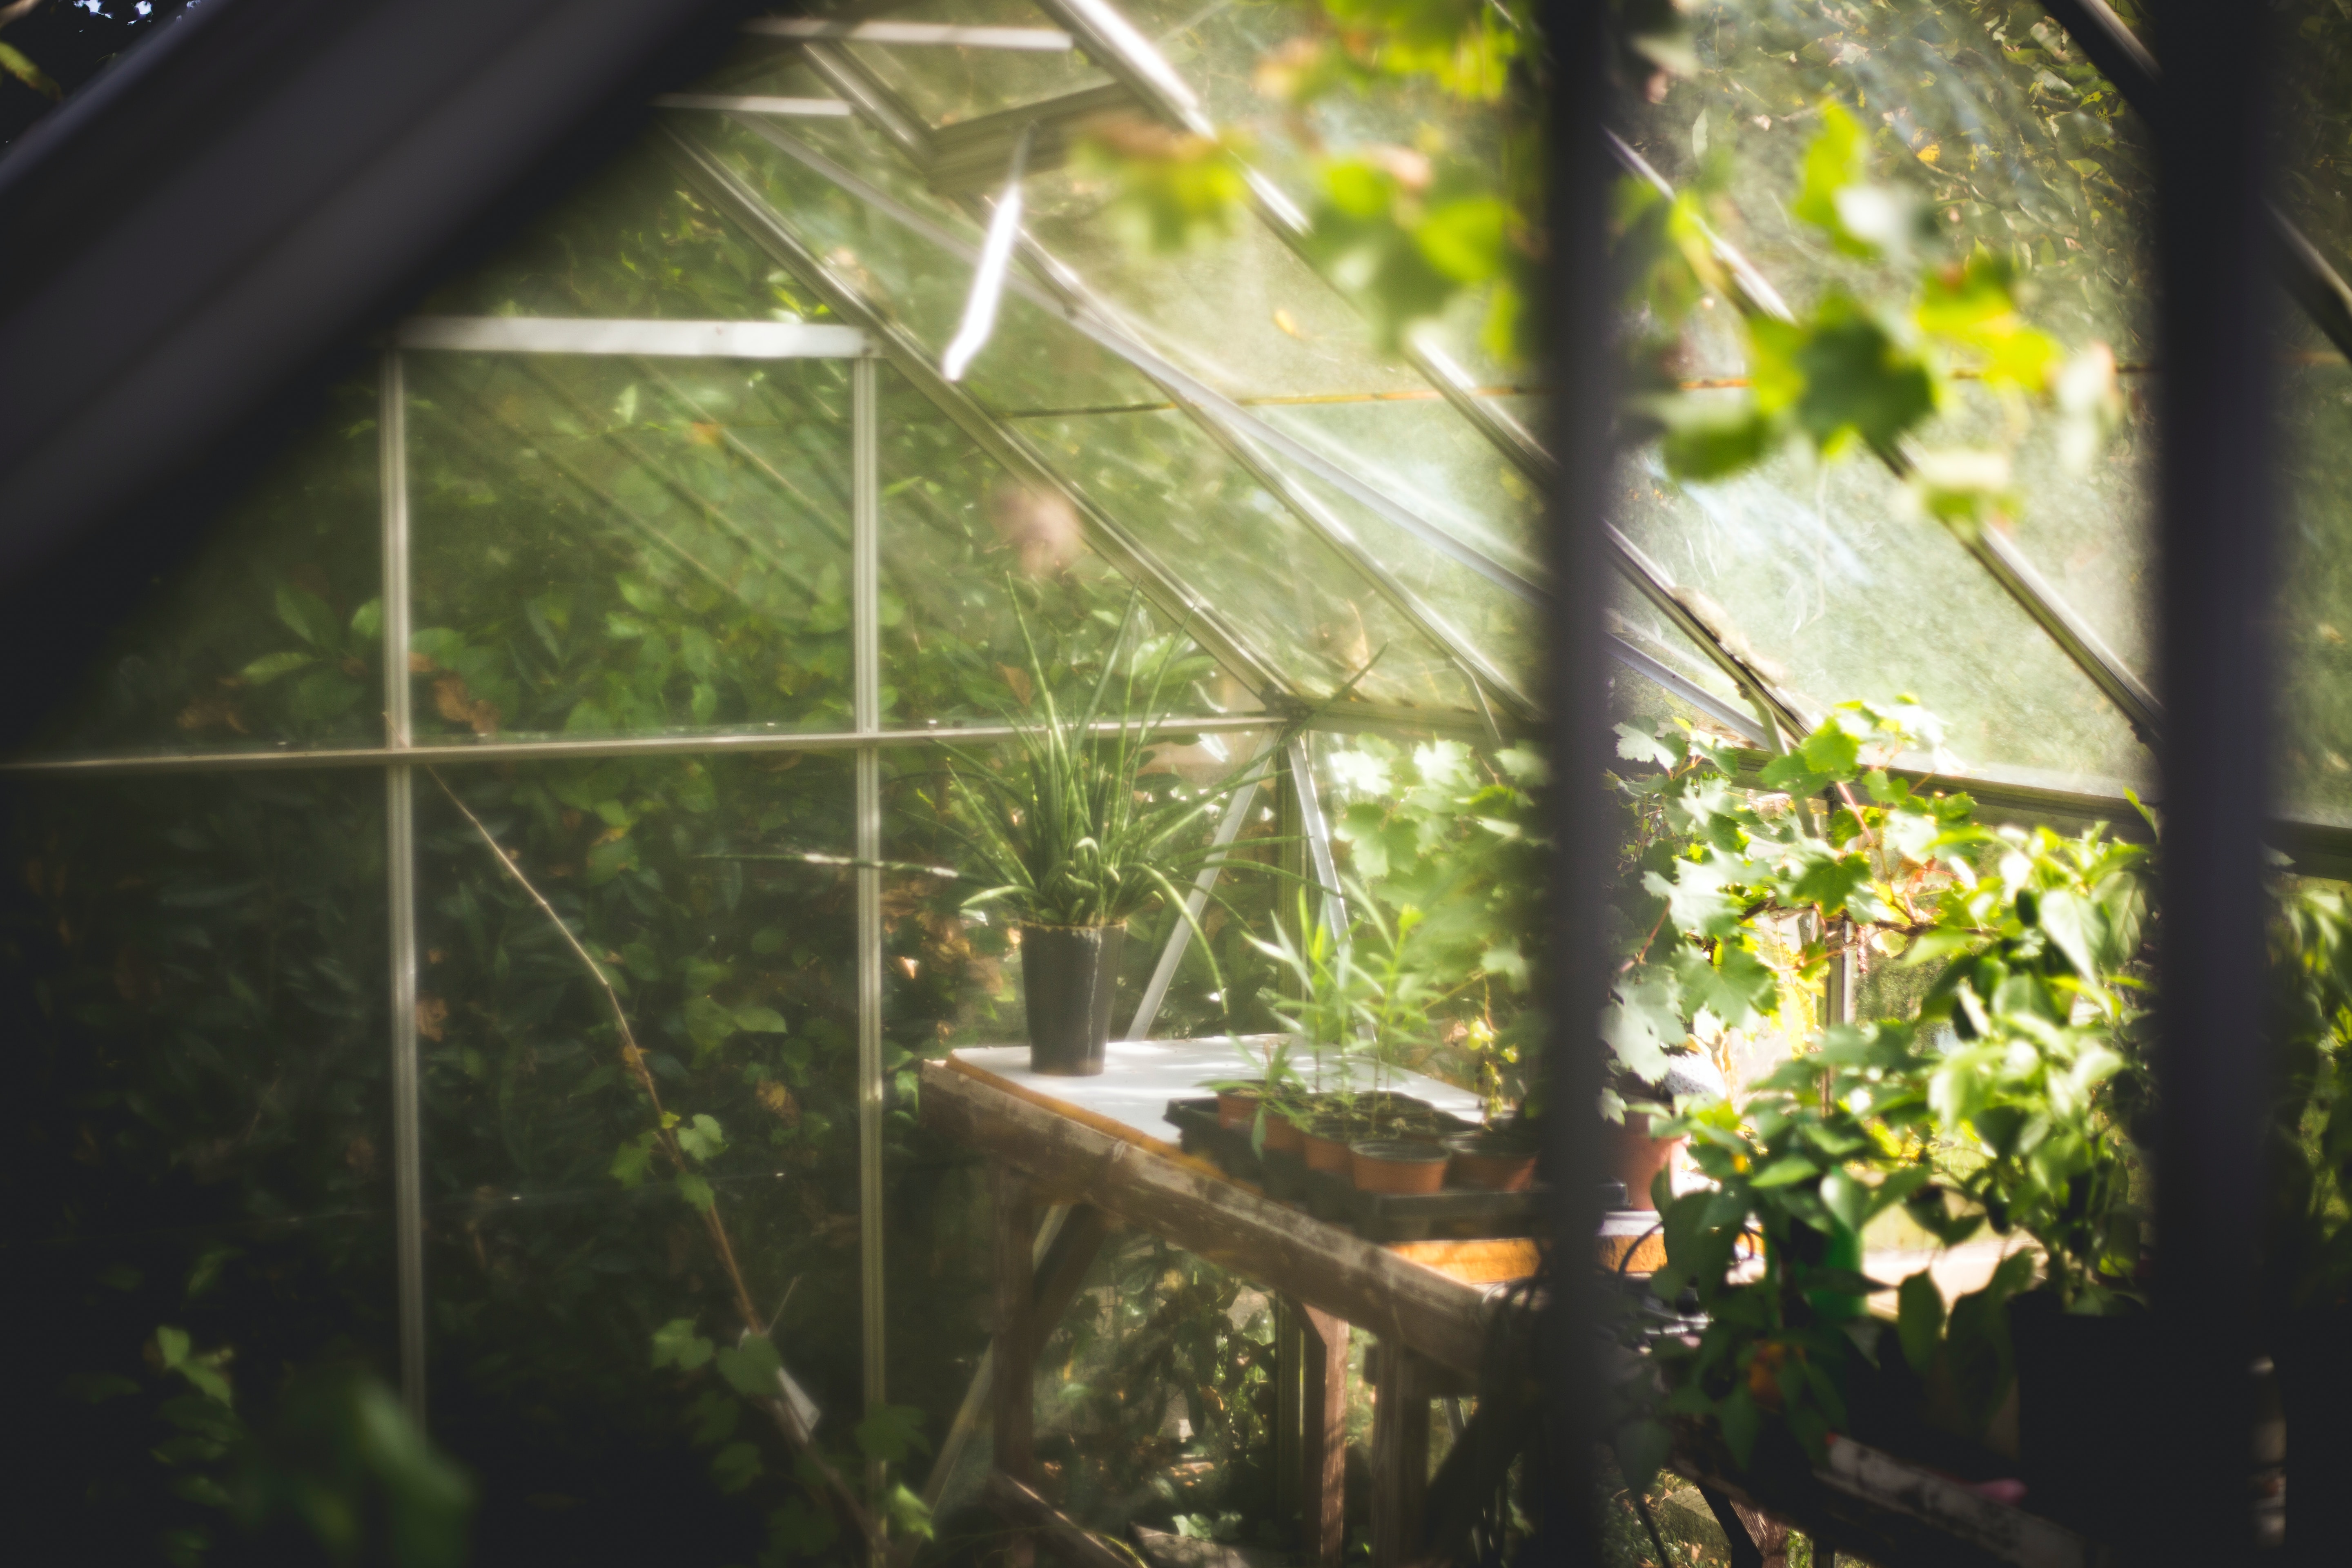 muted sunshine lighting up a small backyard greenhouse with vegetable seedlings on a bench and larger plants in the background.